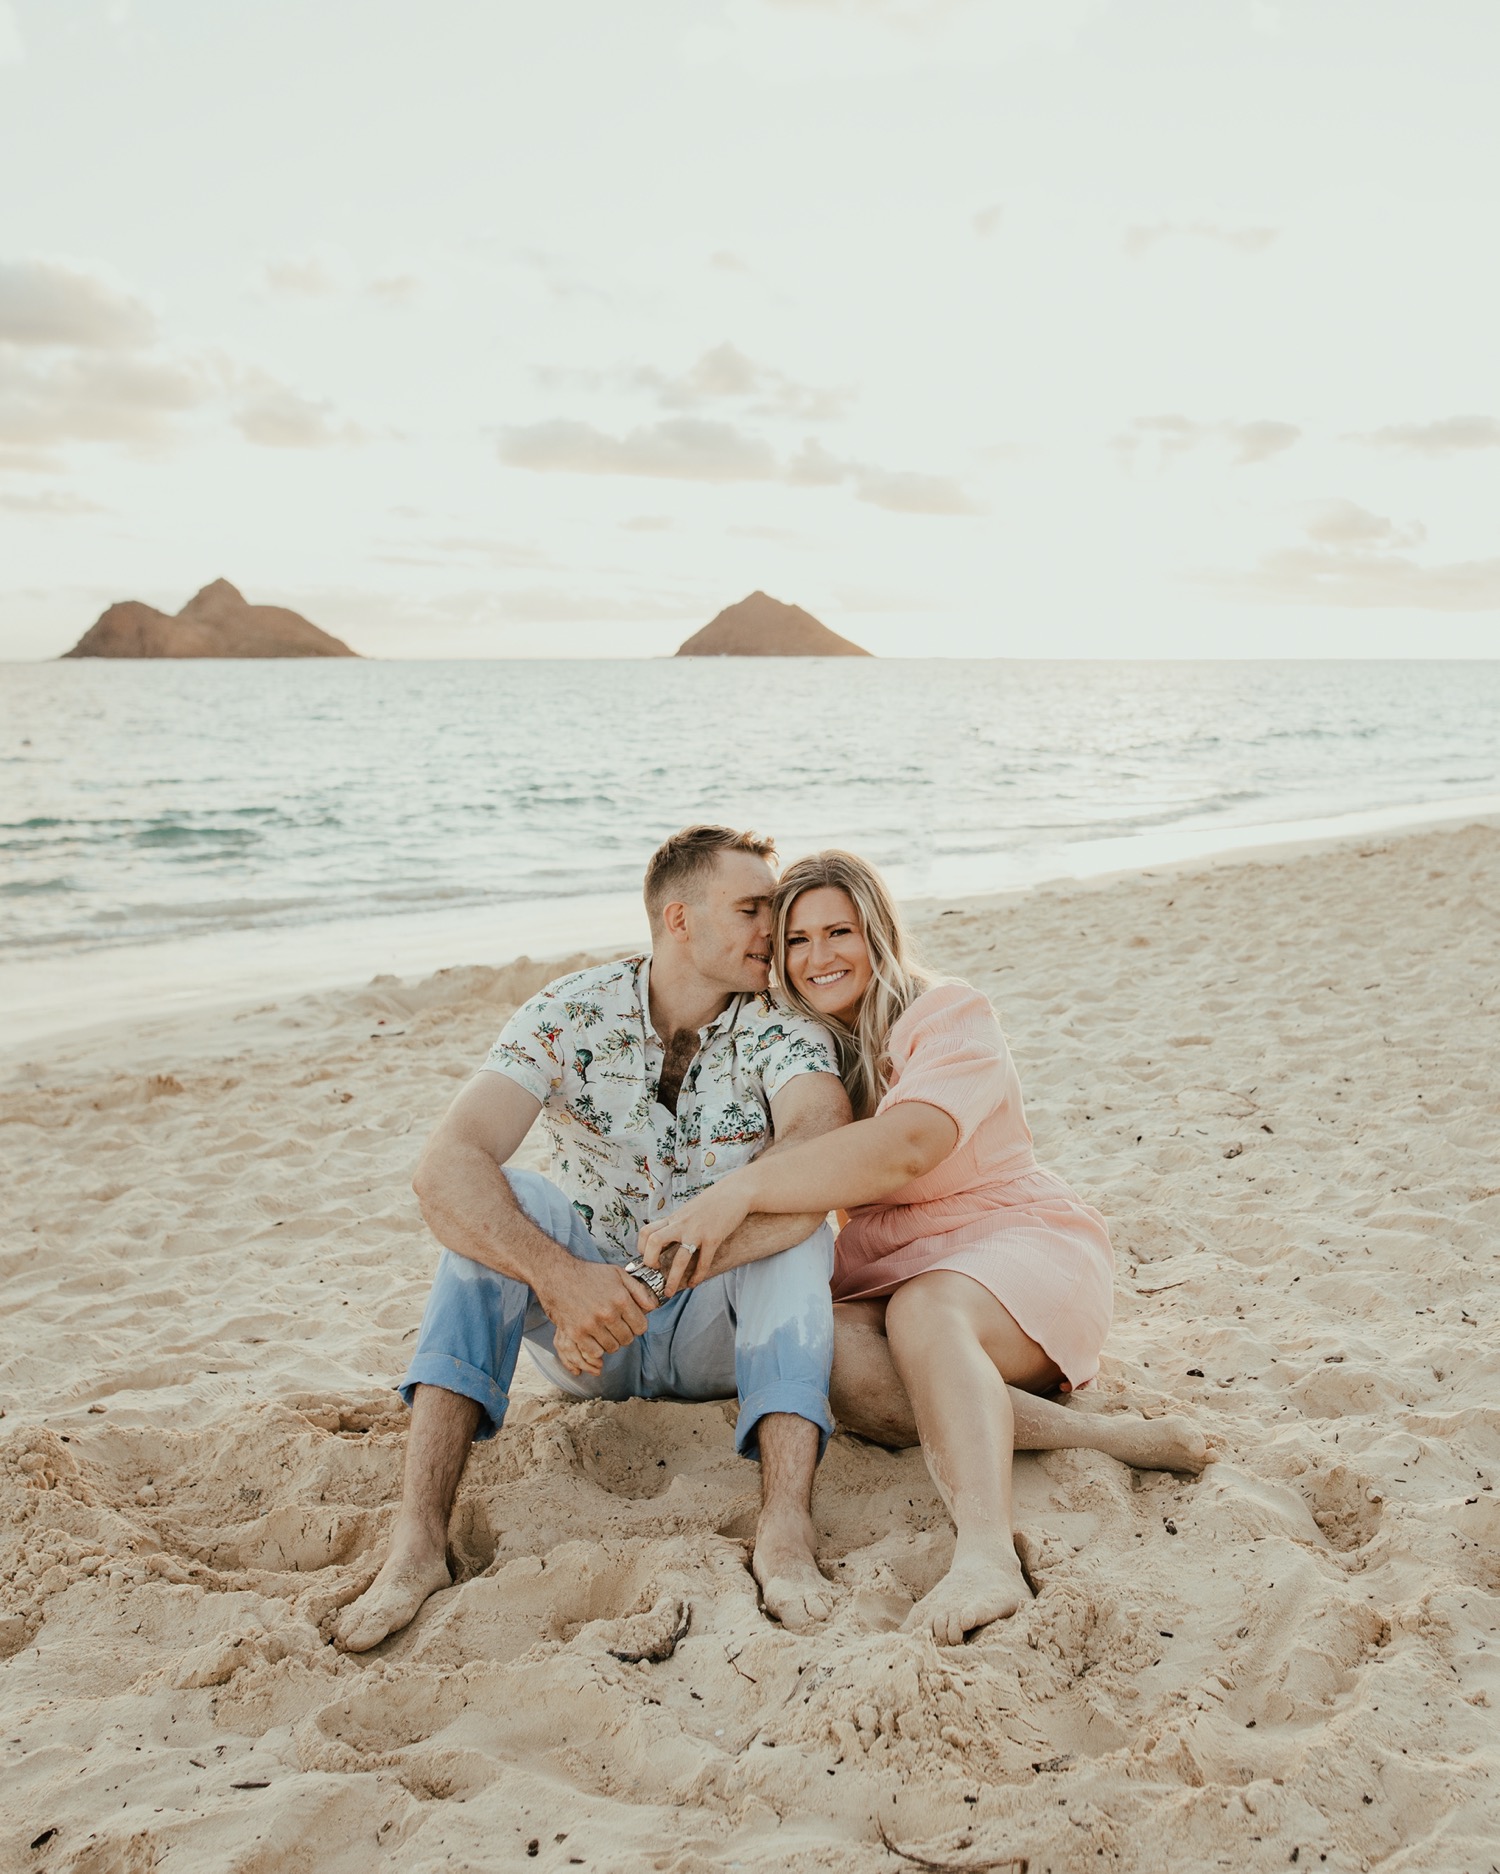 Why the Beach is Perfect for Your Couple Photos | Couple Photo Maternity  Session in Florida - chloemariephotography.com